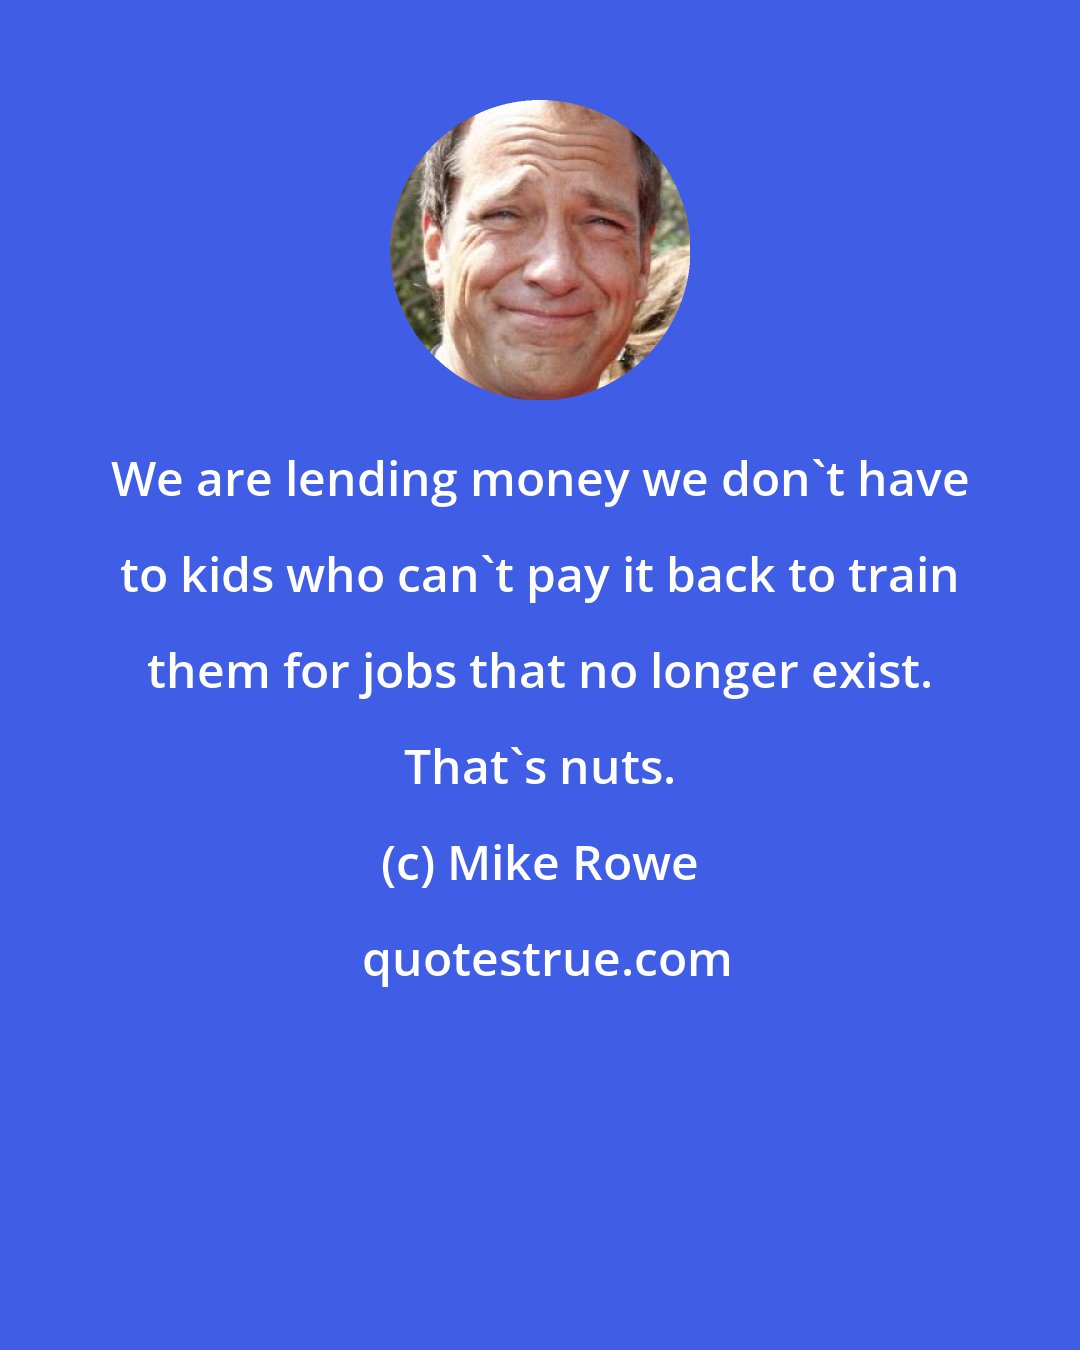 Mike Rowe: We are lending money we don't have to kids who can't pay it back to train them for jobs that no longer exist. That's nuts.